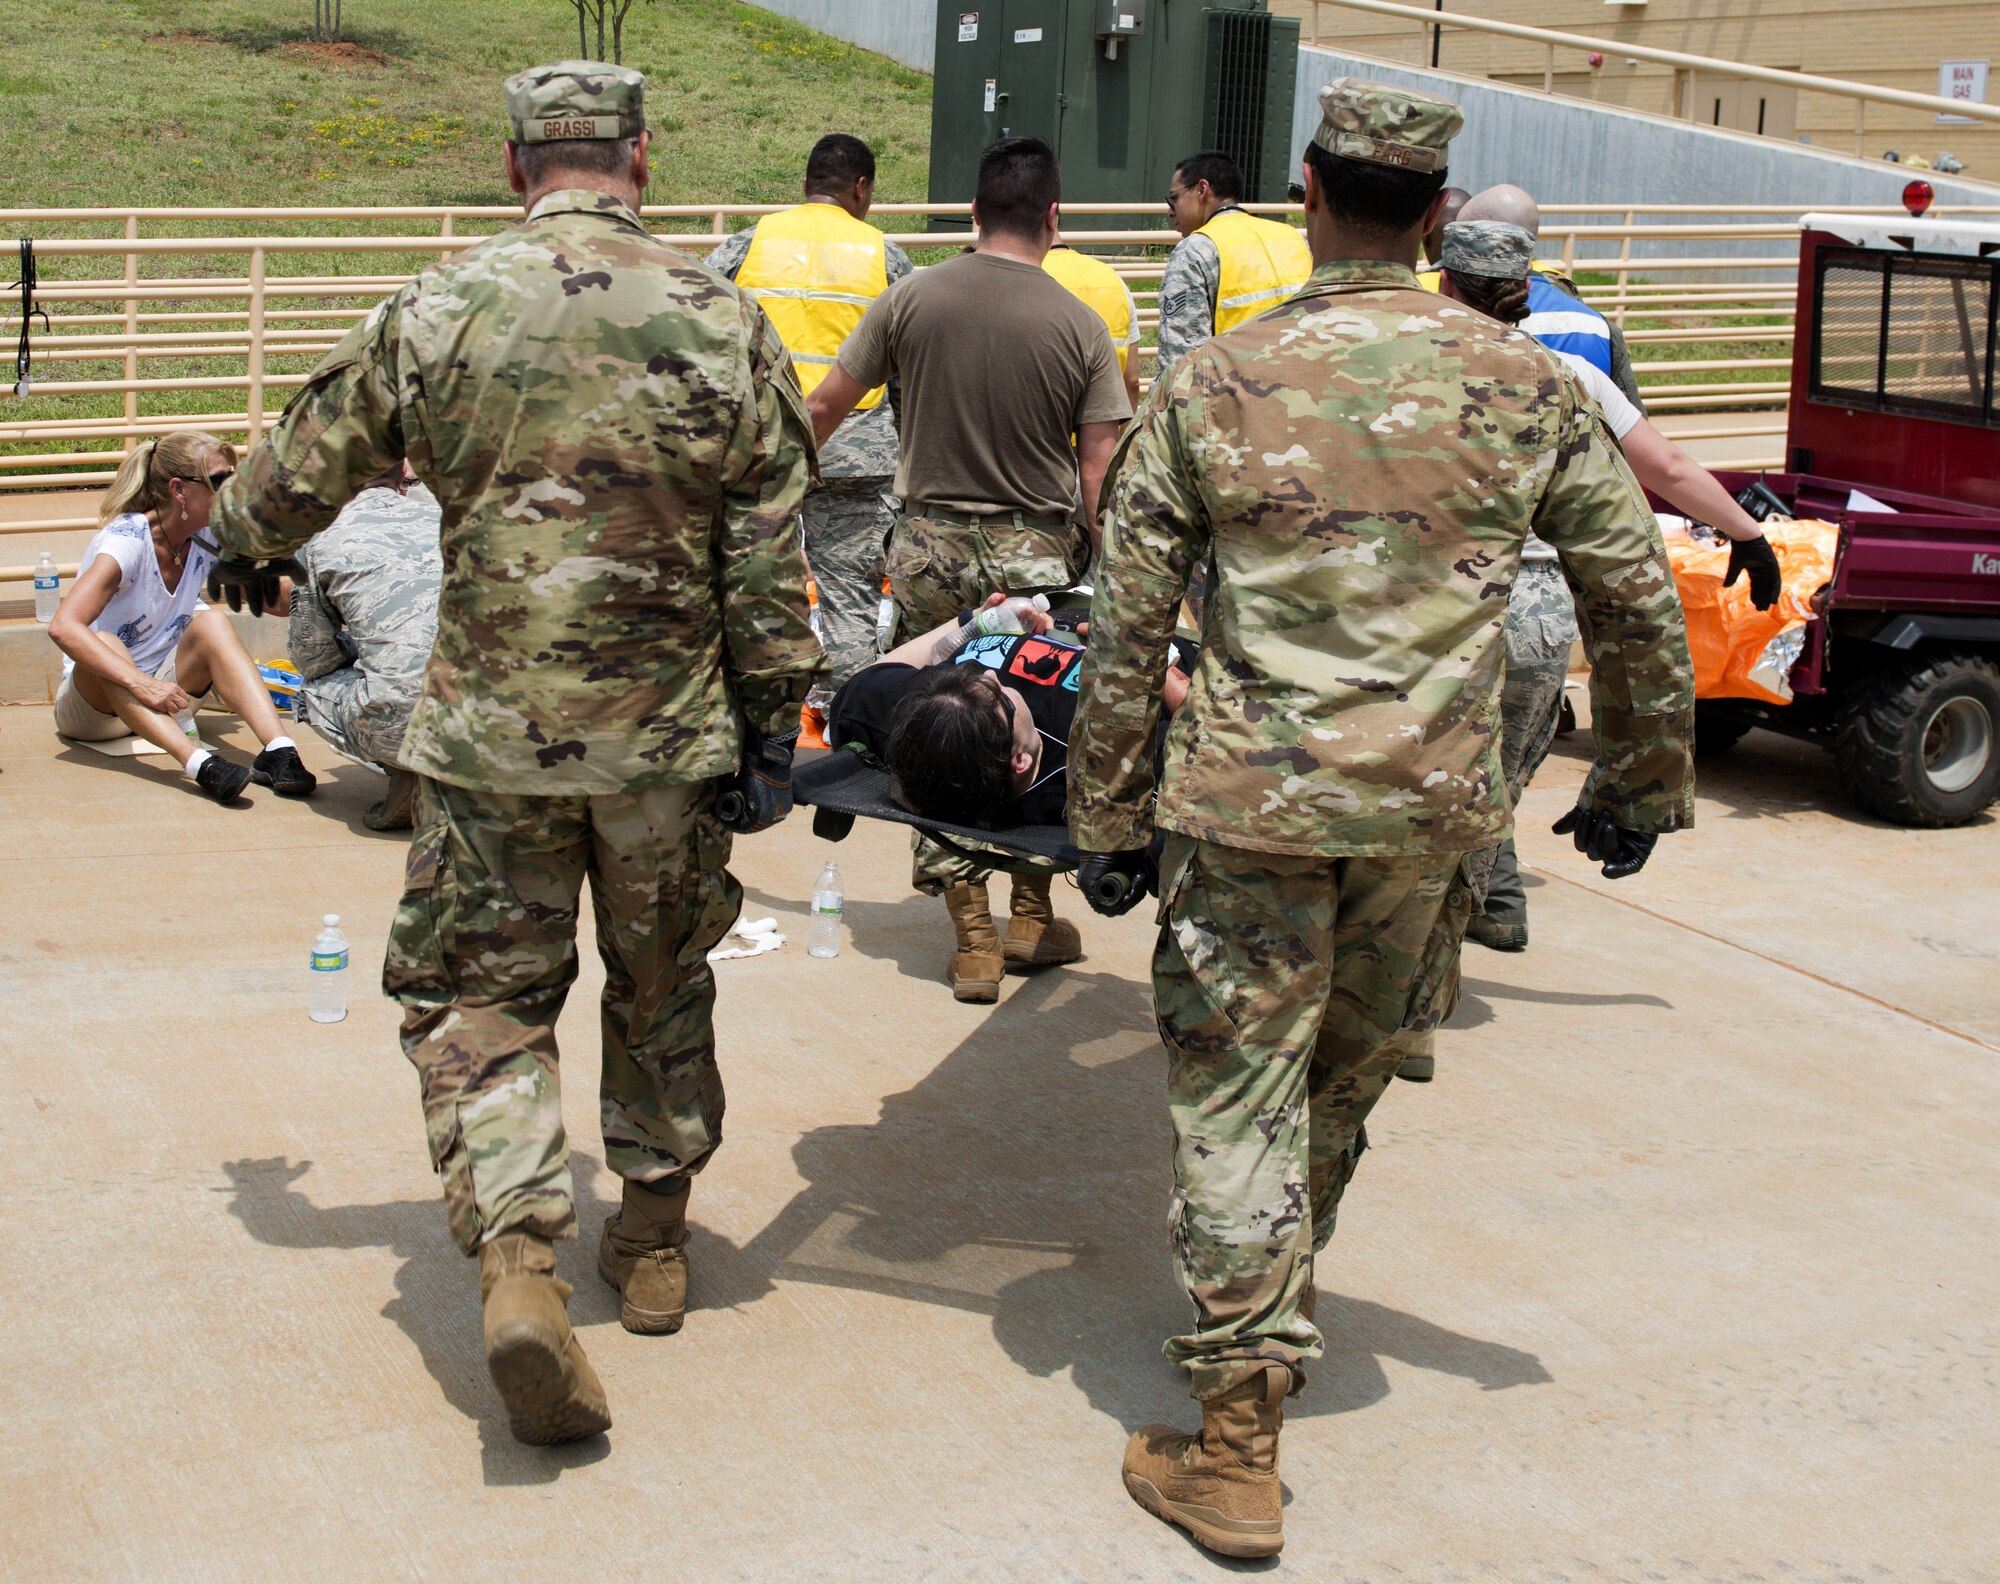 U.S. Air Force Airmen assigned to the 20th Medical Group carry a litter during a mass casualty exercise at Shaw Air Force Base, South Carolina, Aug. 1, 2019.